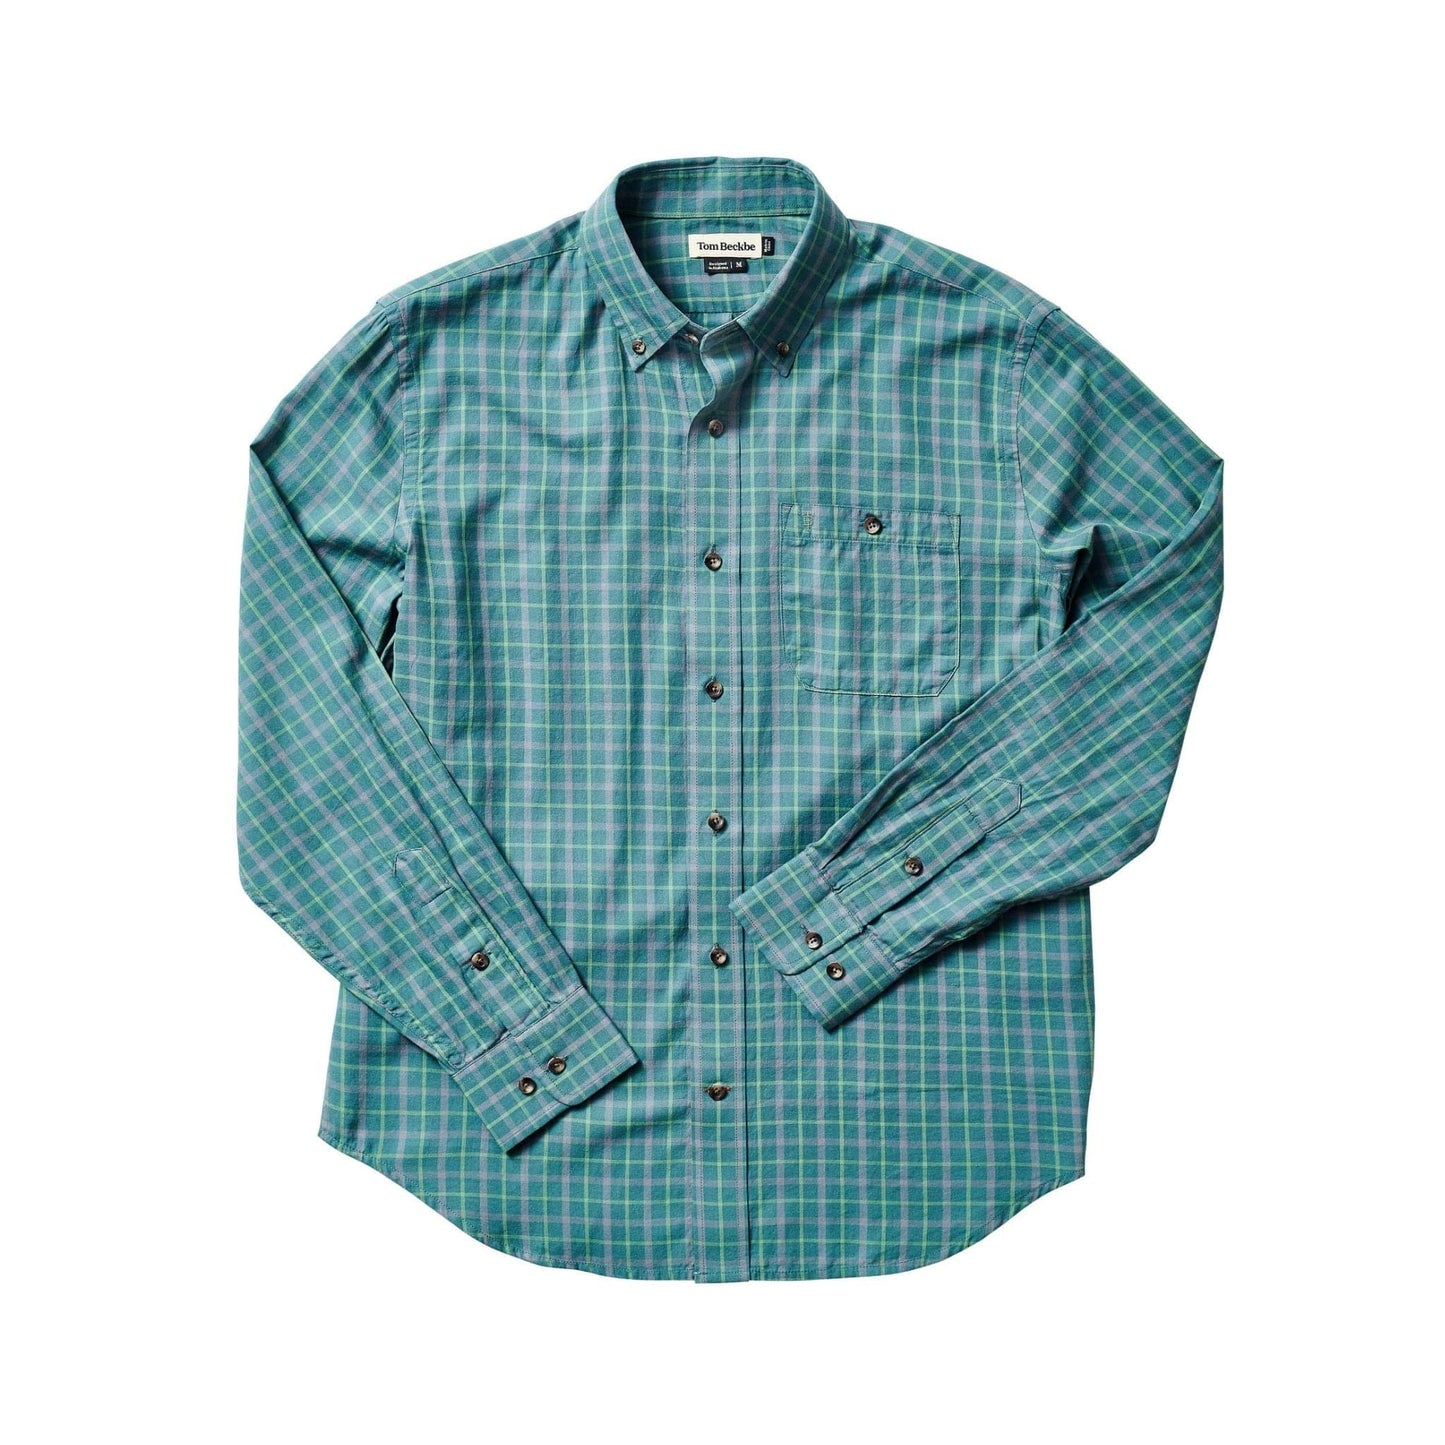 Headwaters Green Plaid